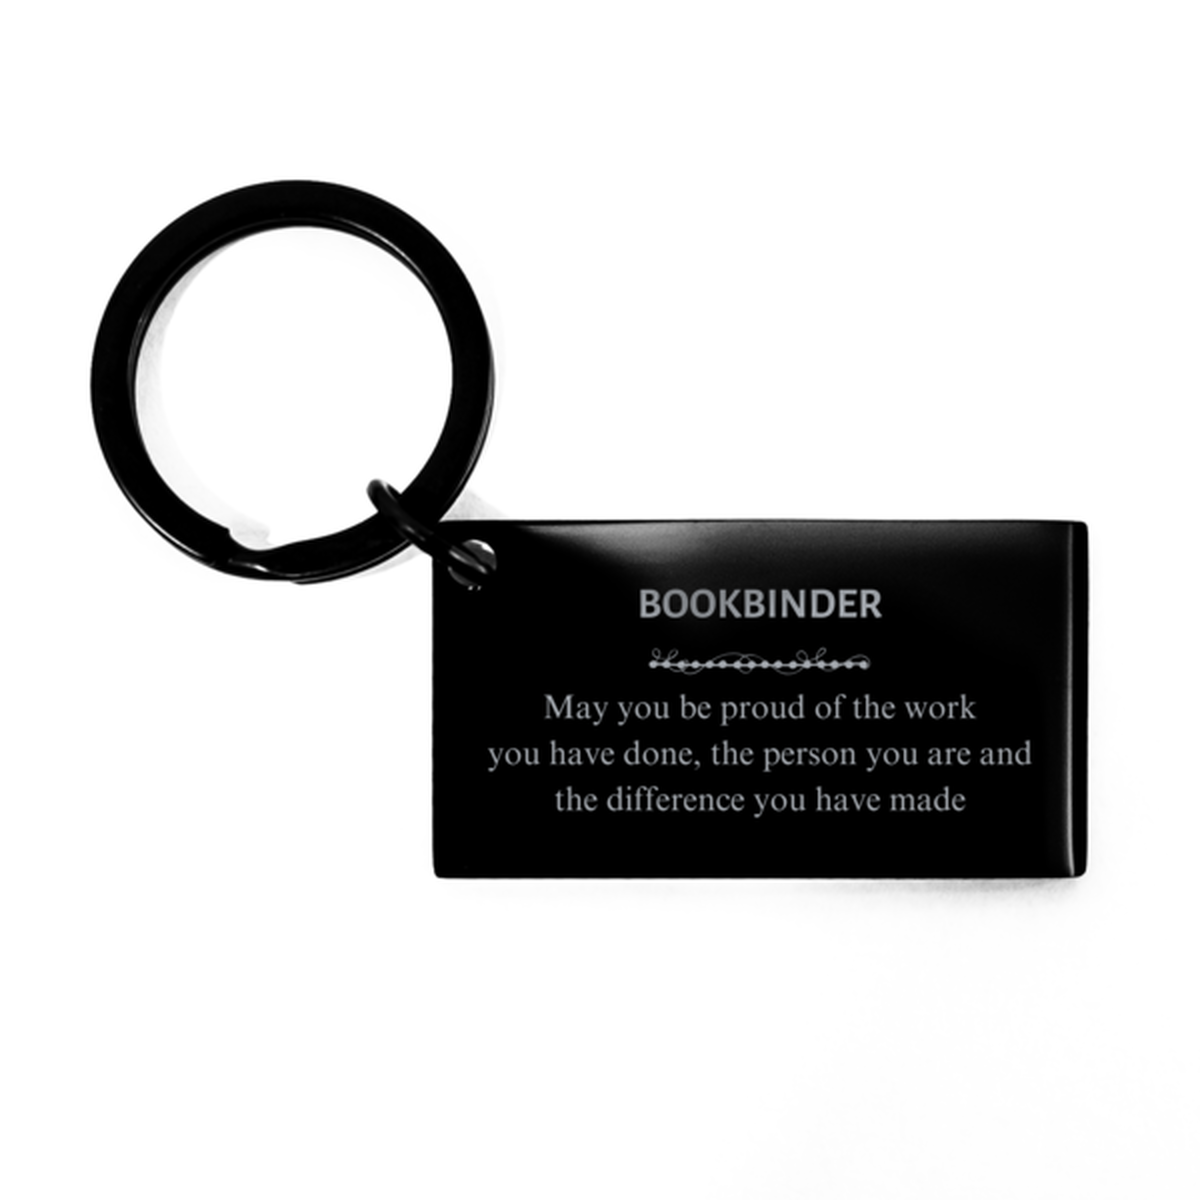 Database Administrator May you be proud of the work you have done, Retirement Bookbinder Keychain for Colleague Appreciation Gifts Amazing for Bookbinder